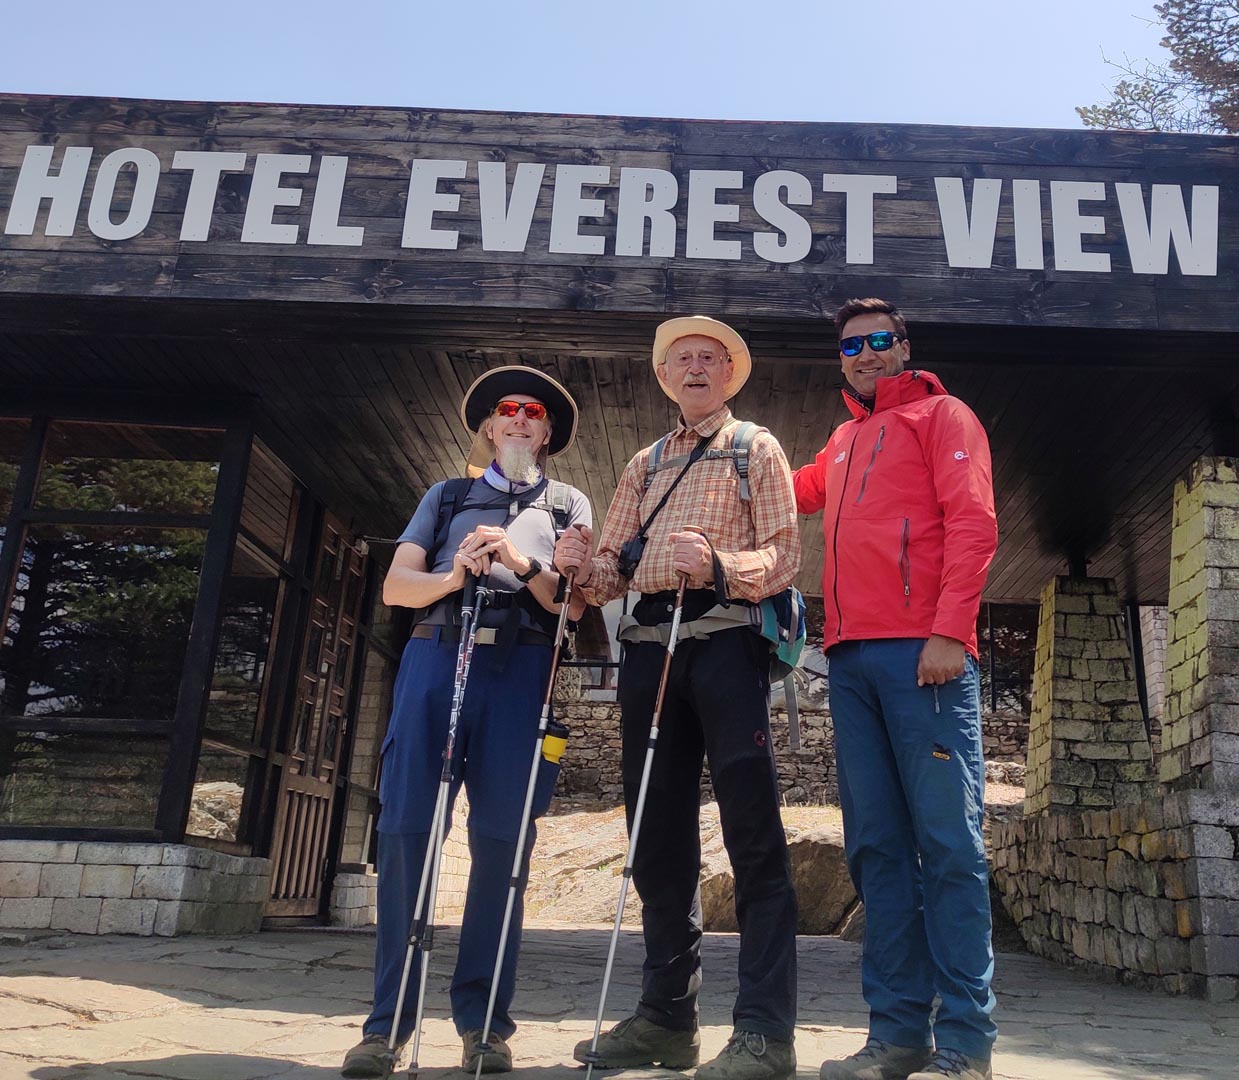 Acclimatization hike to Hotel Everest View